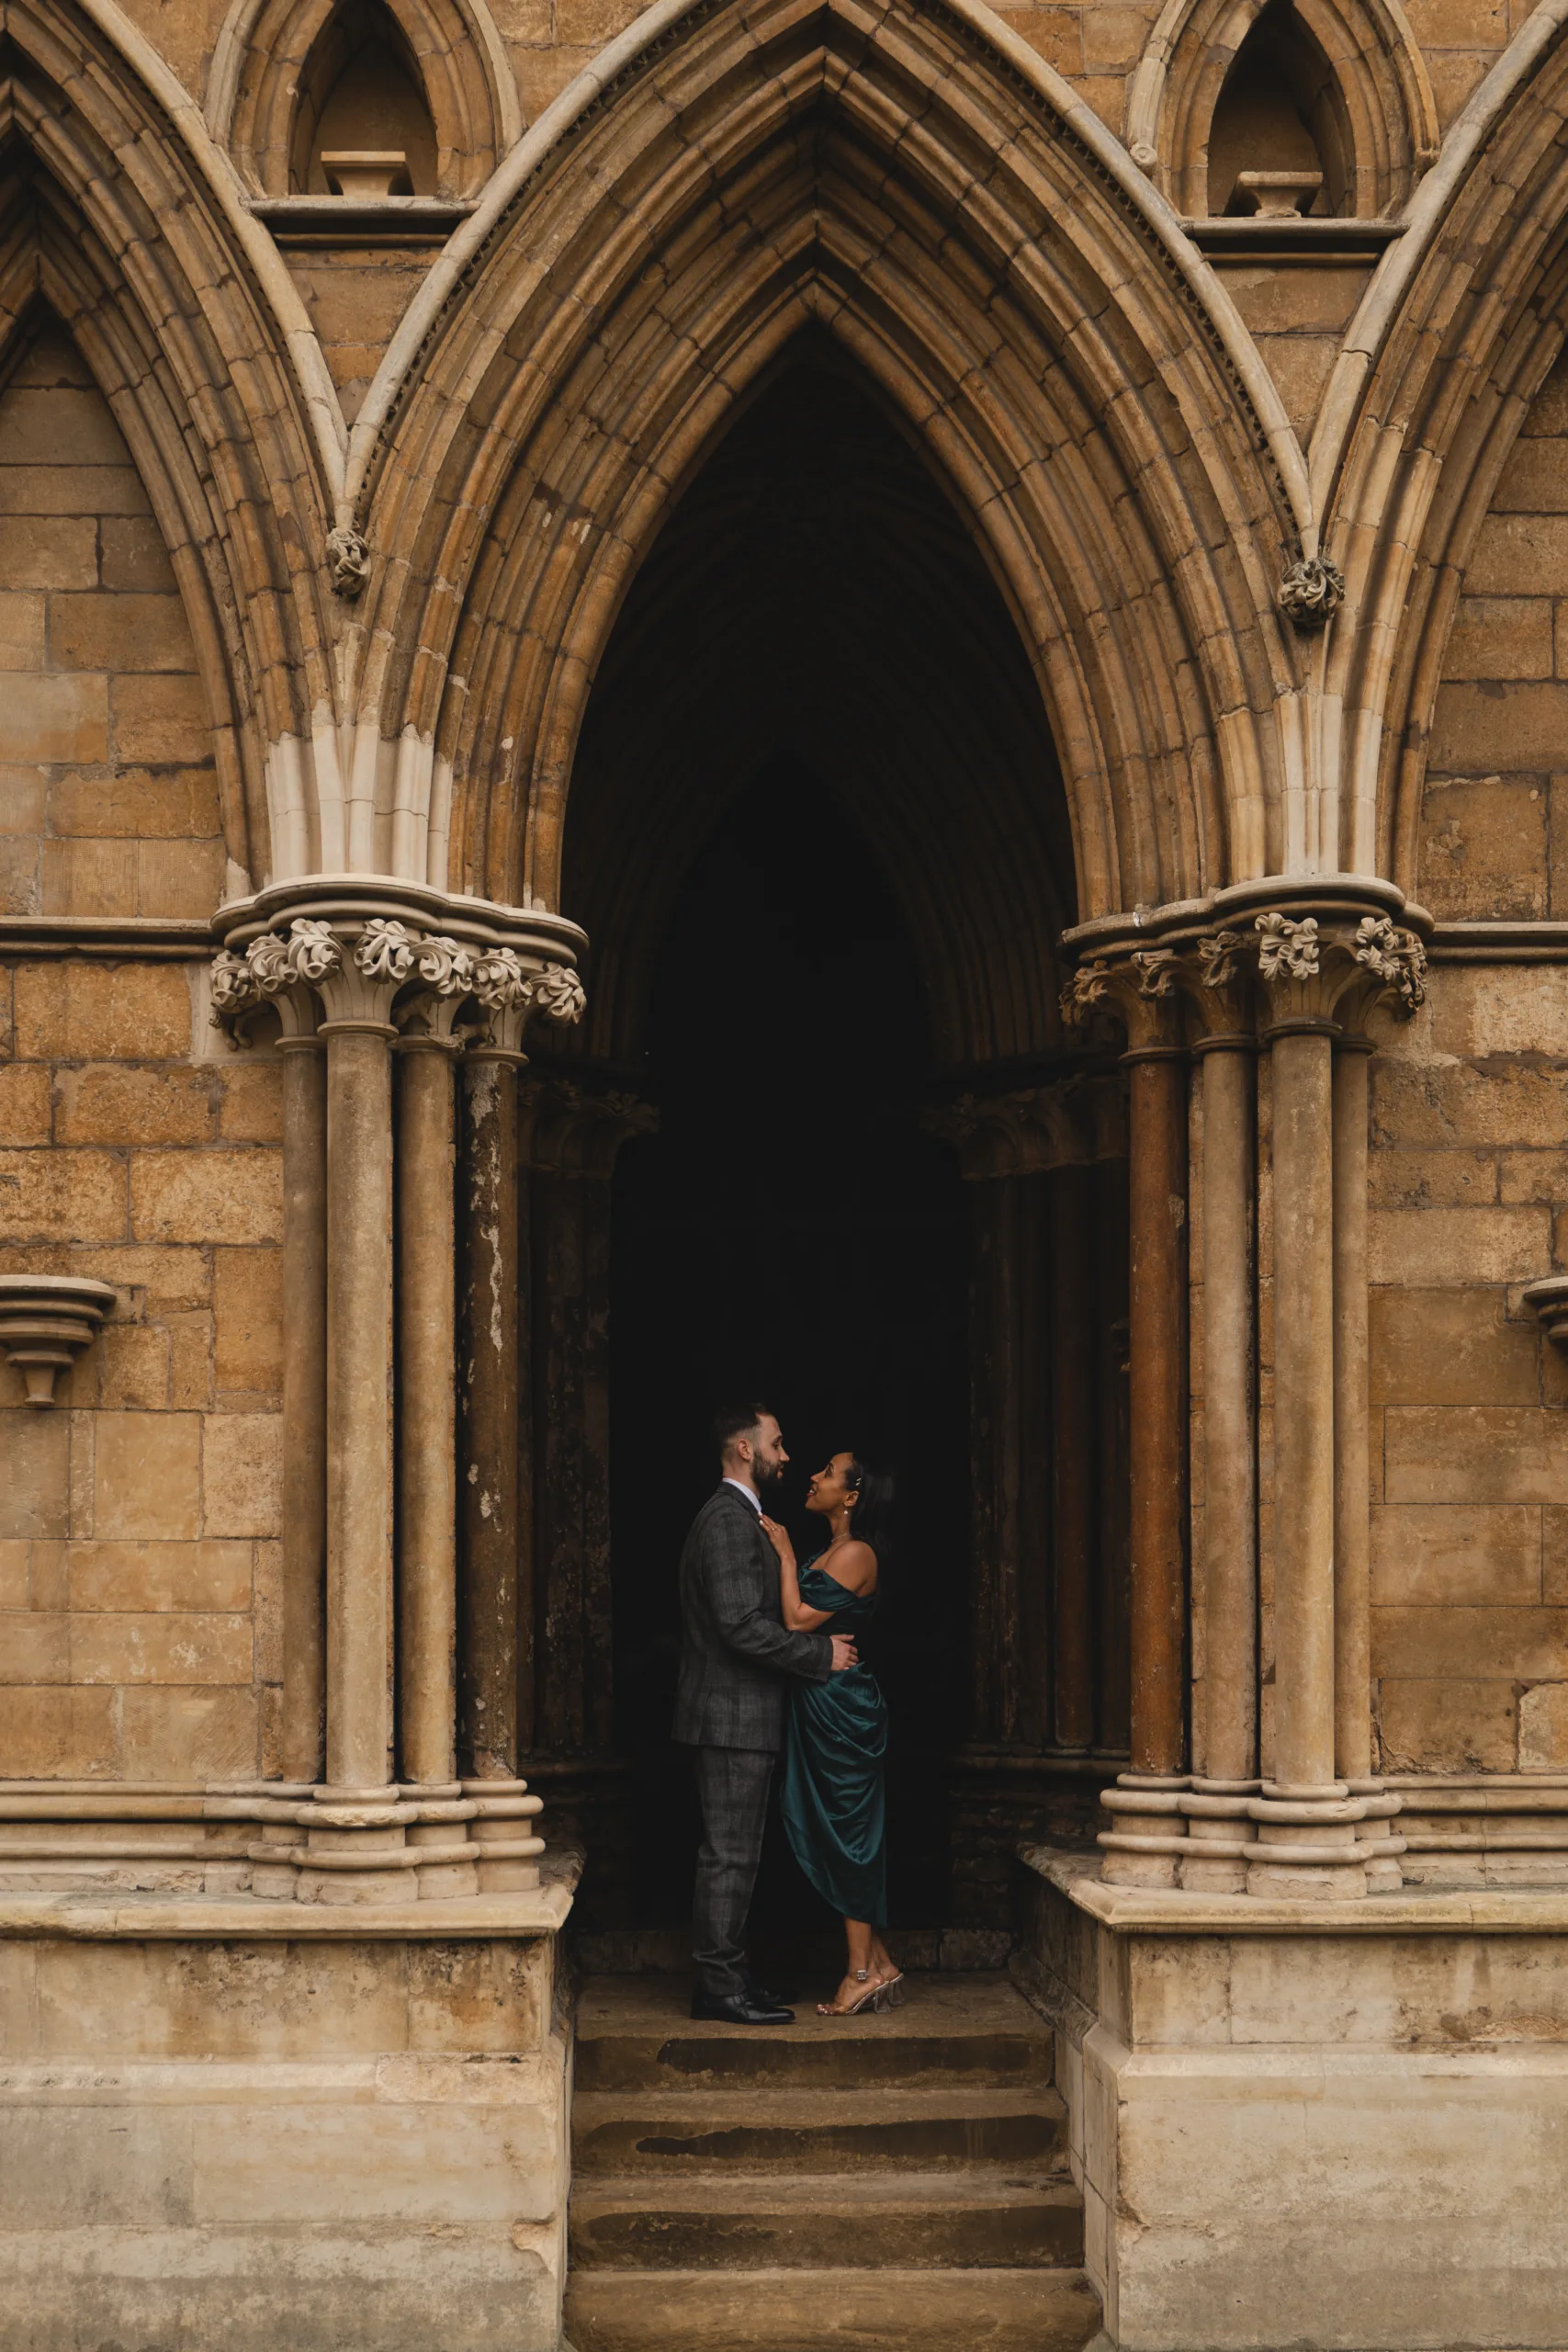 A bride and groom standing in front of an arched doorway during their Lincolnshire wedding.